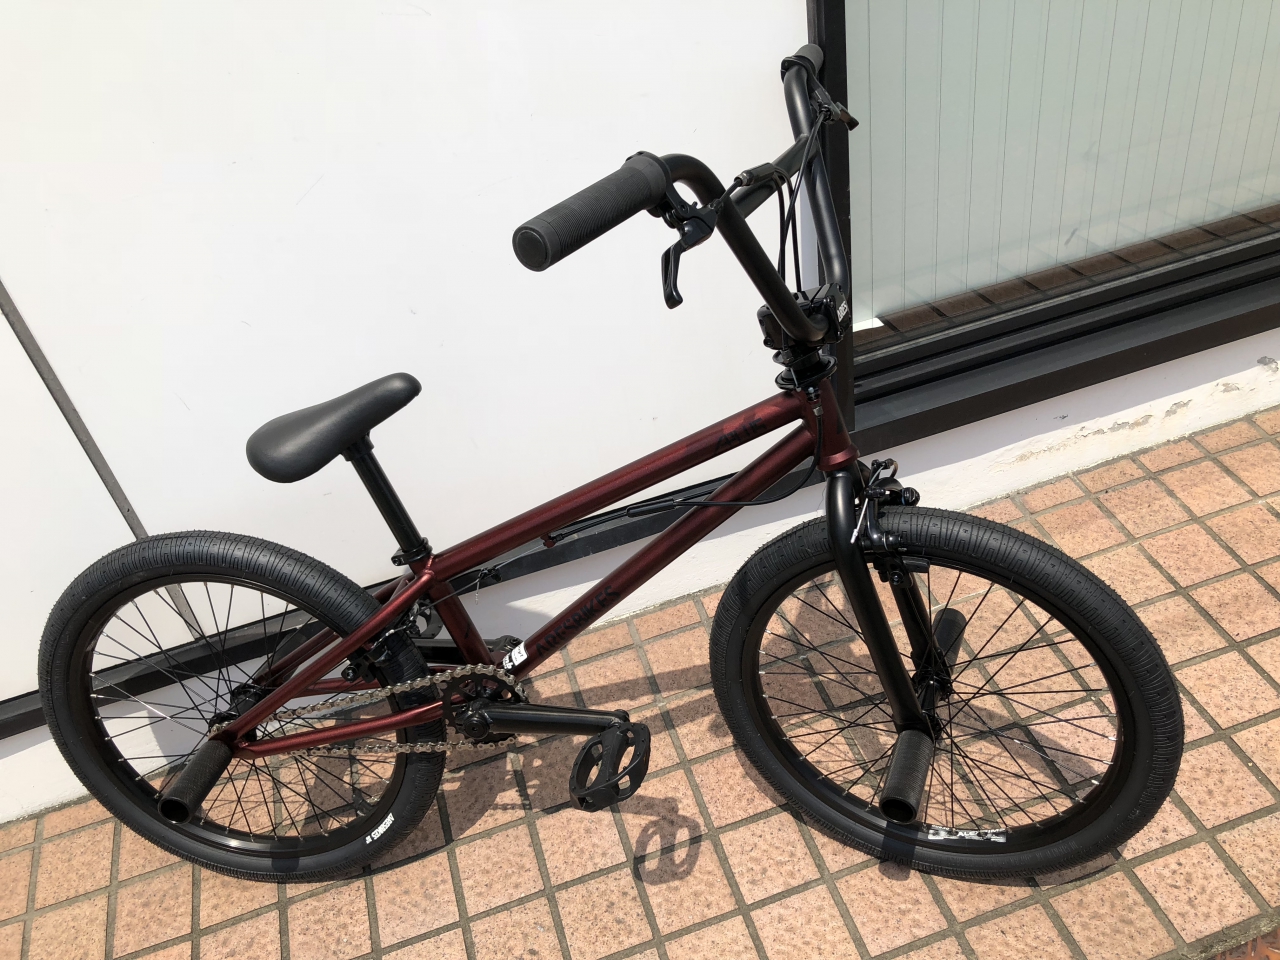 BMX ARES APLUS 納車…from Oさま！ - Climb cycle sports